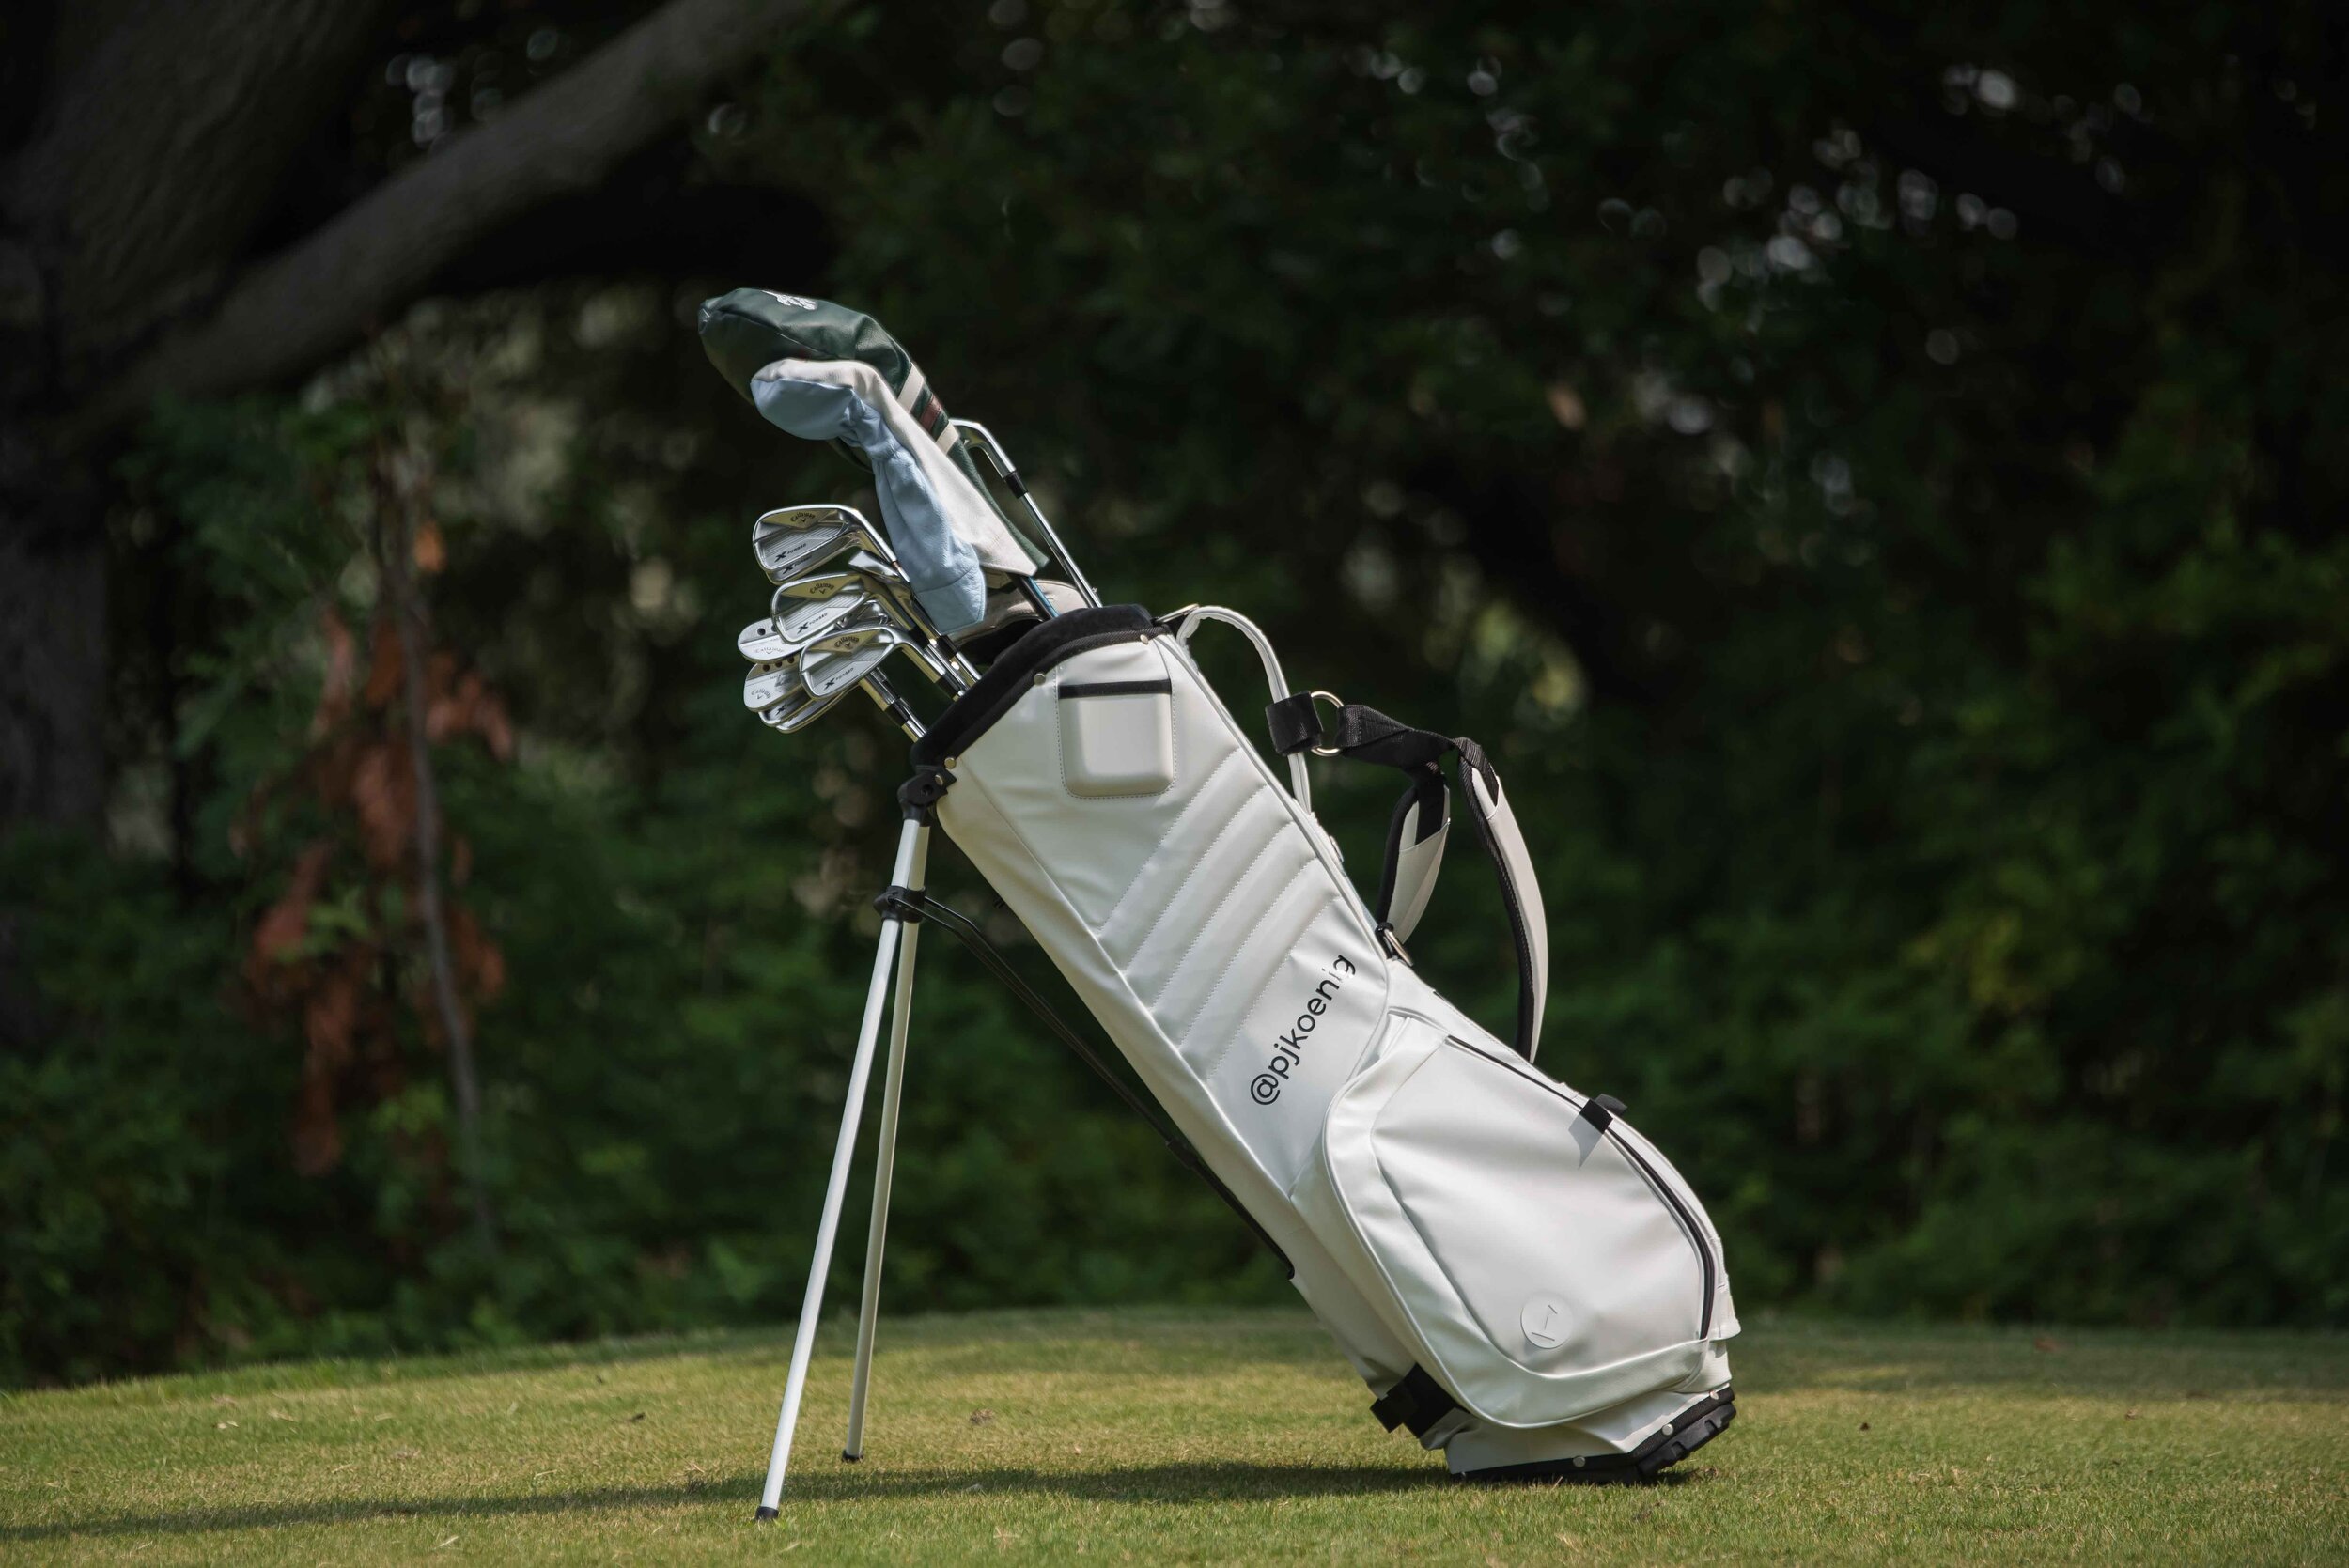 A Review on Vessel Cart Bags by Just Golf Stuff